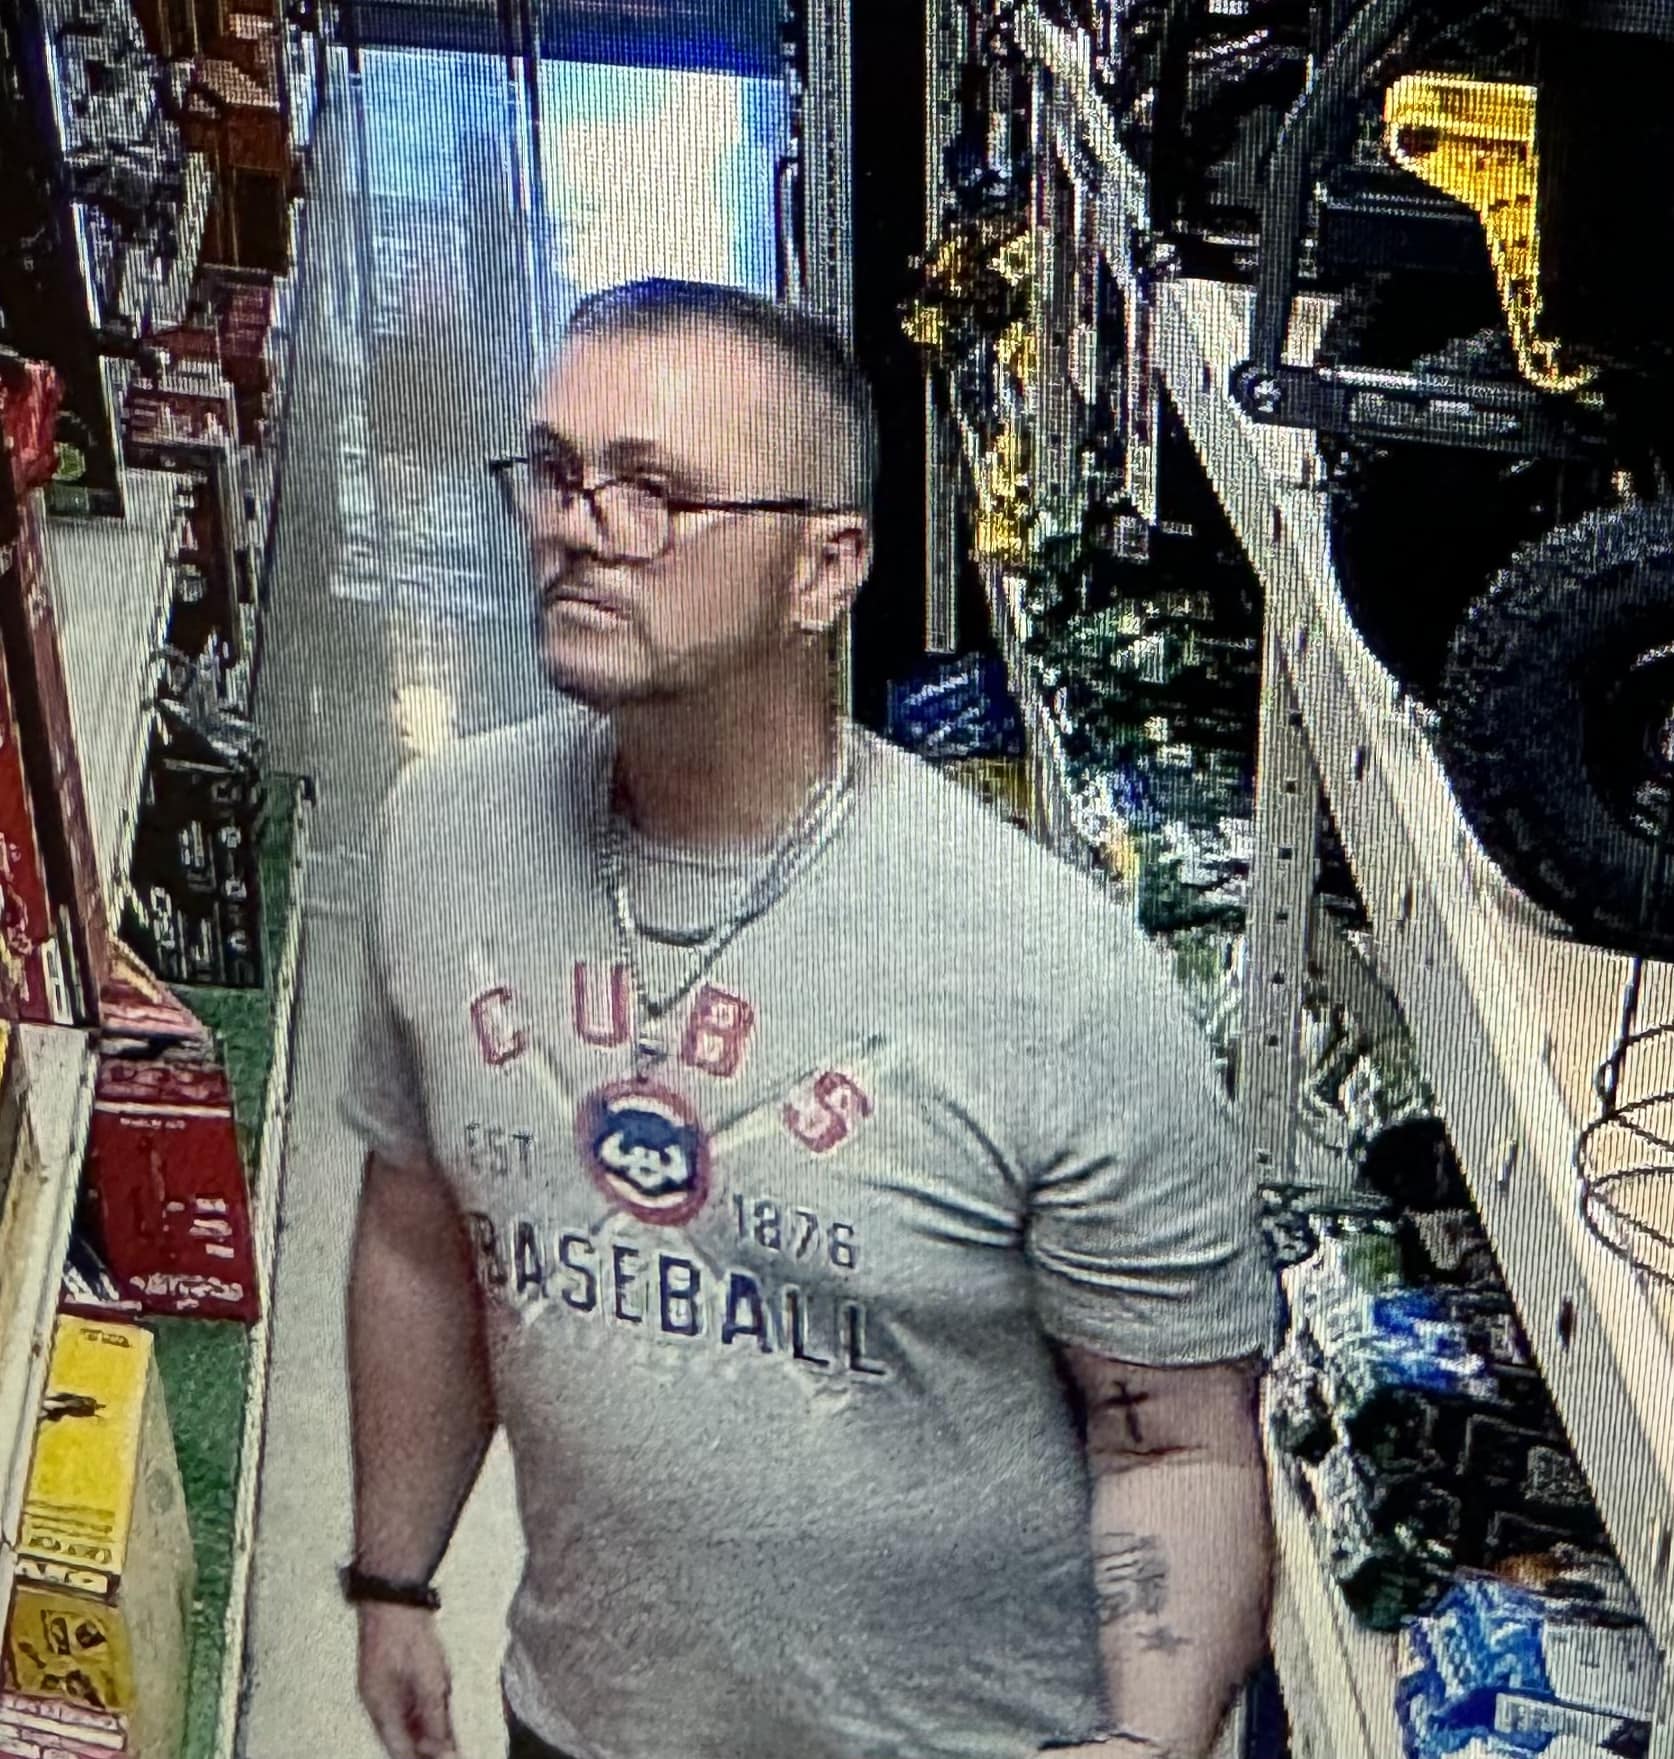 Clinton Police asking for help in recent theft case